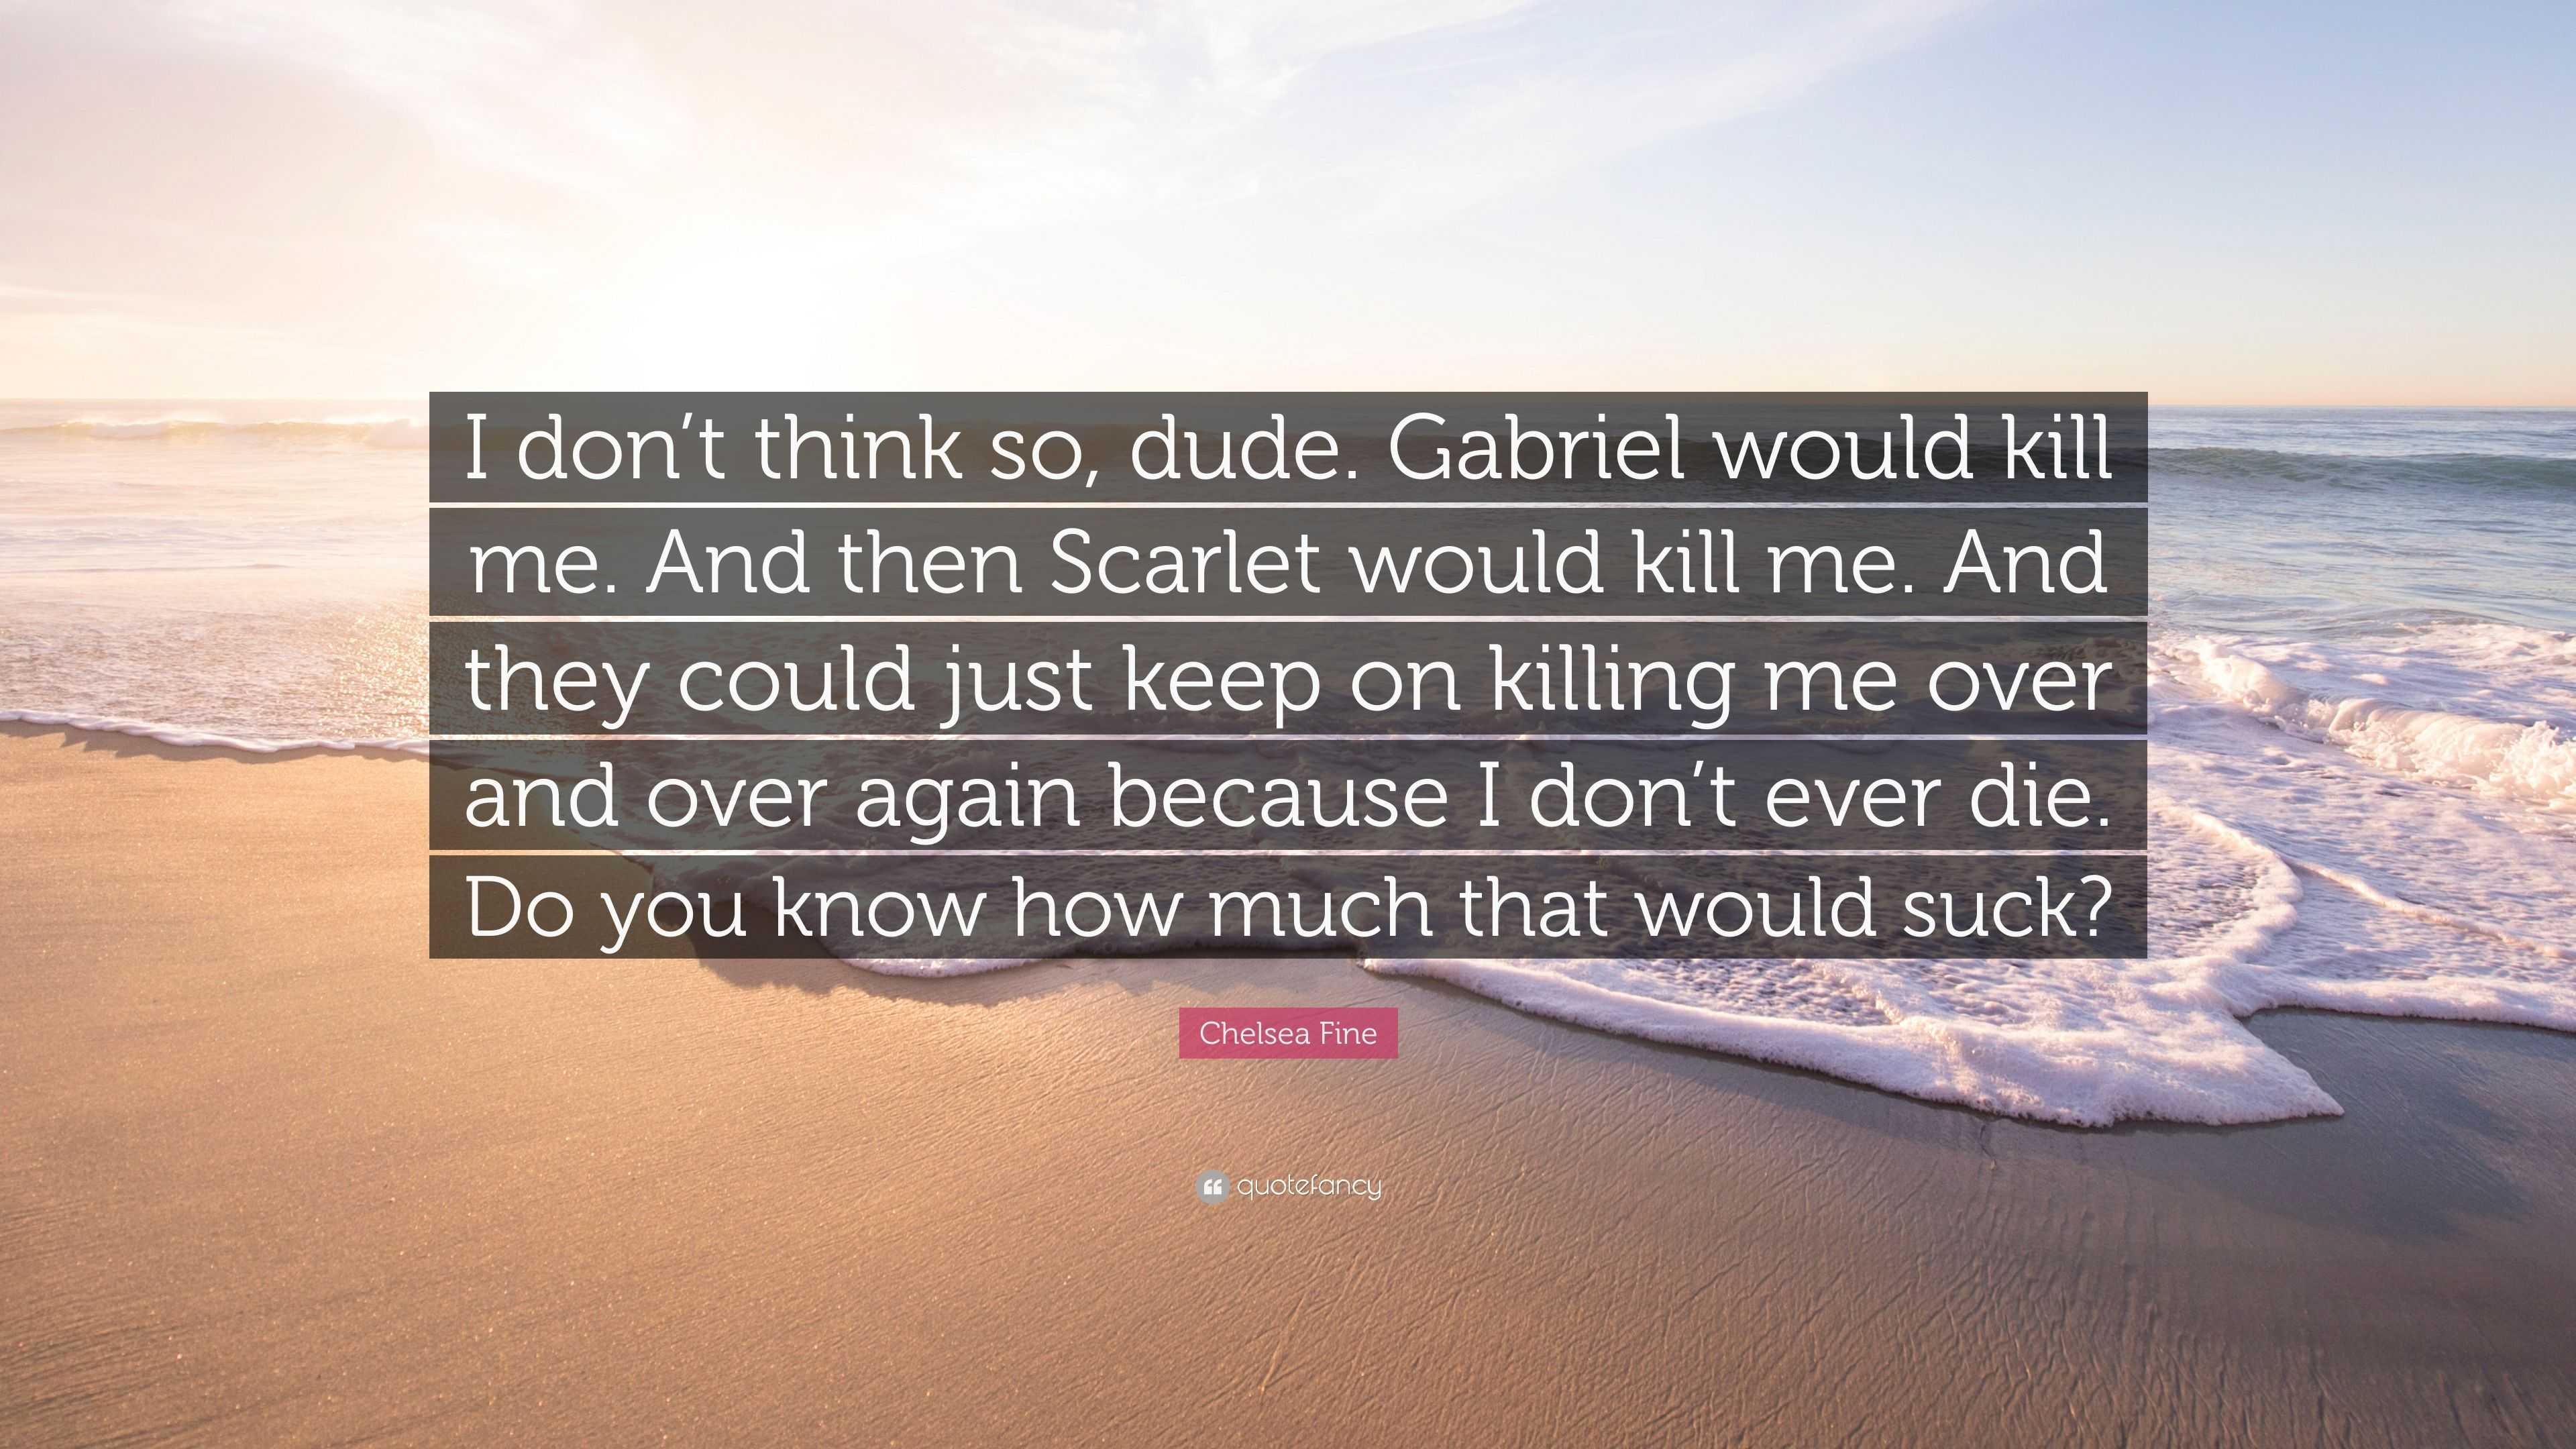 Chelsea Fine Quote: “I don't think so, dude. Gabriel would kill me. And  then Scarlet would kill me. And they could just keep on killing me ov”